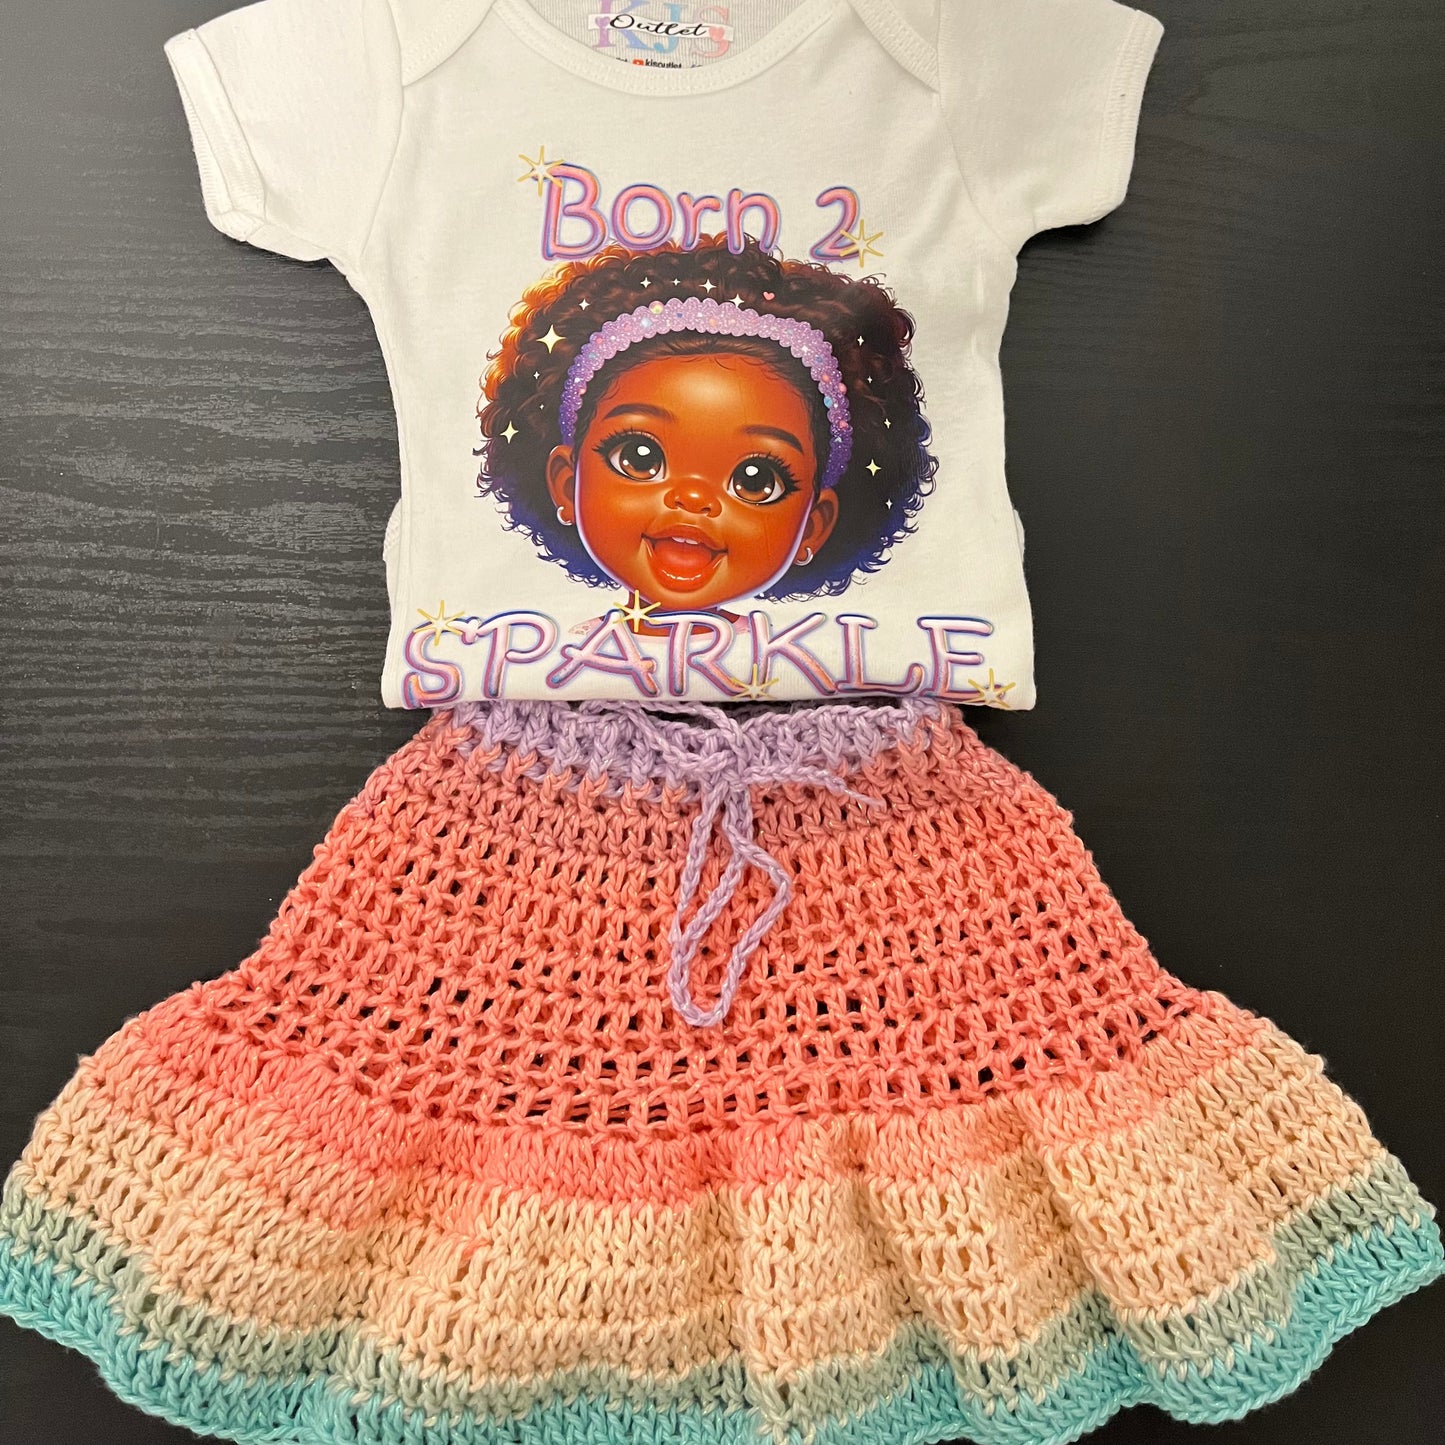 Handmade Baby Outfit with Crochet Cotton Skirt and Unique -Designed Onesie